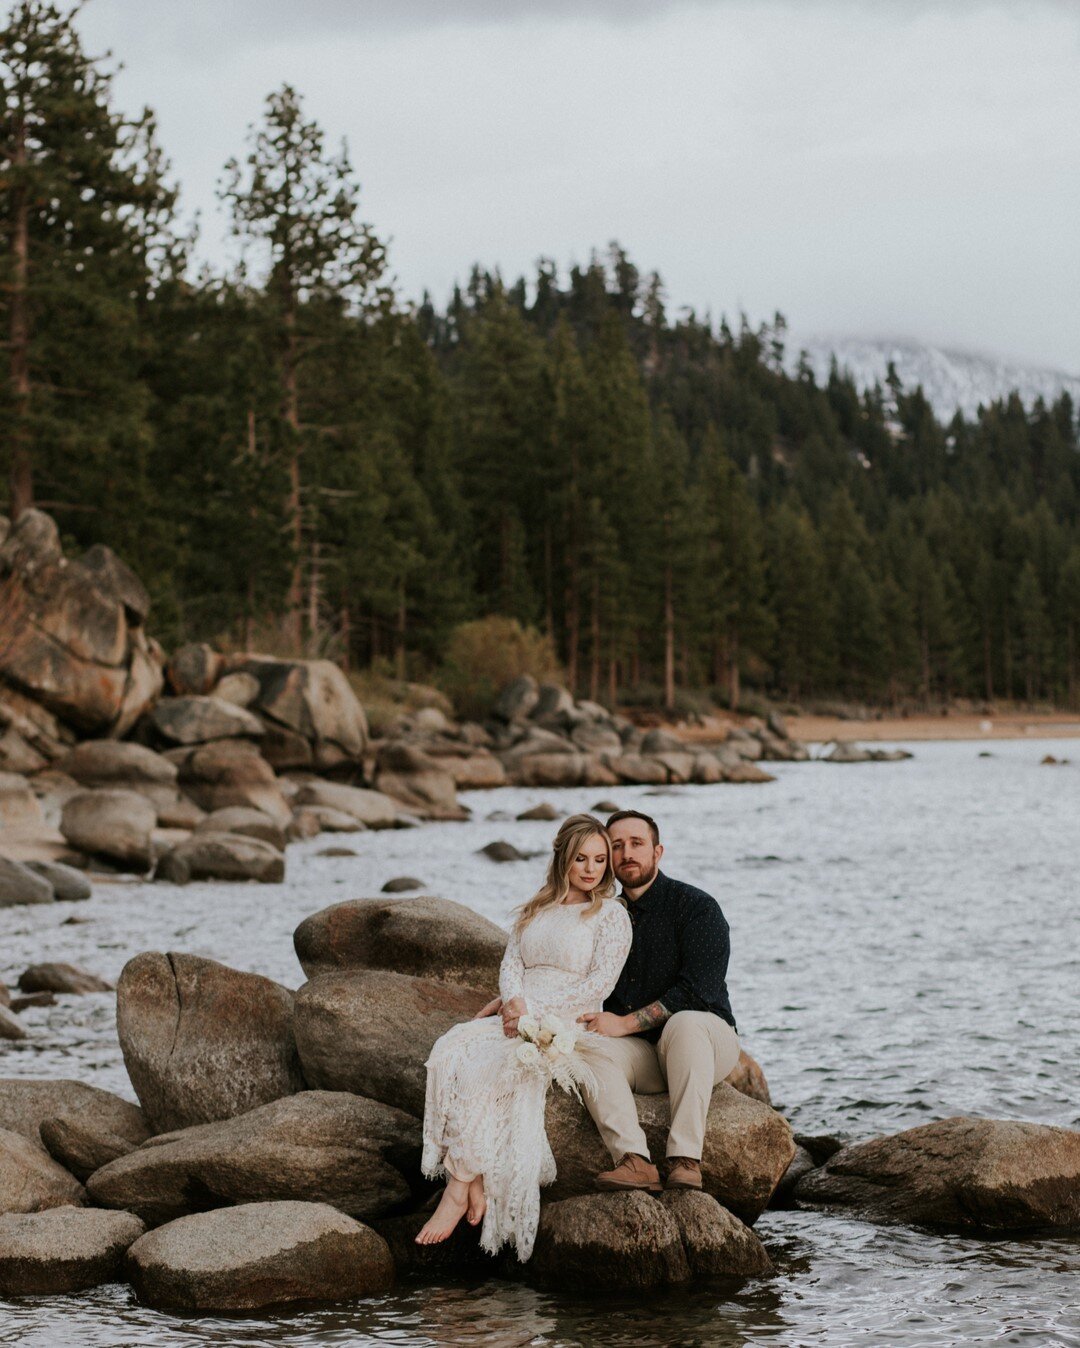 Tahoe has many looks, but this moody summer storm is a fave.⠀⠀⠀⠀⠀⠀⠀⠀⠀
⠀⠀⠀⠀⠀⠀⠀⠀⠀
Although, if anyone knows Gary, you'll know that this shoot was really full of jokes and laughs. ⠀⠀⠀⠀⠀⠀⠀⠀⠀
⠀⠀⠀⠀⠀⠀⠀⠀⠀
 #SWOONSTRUCK